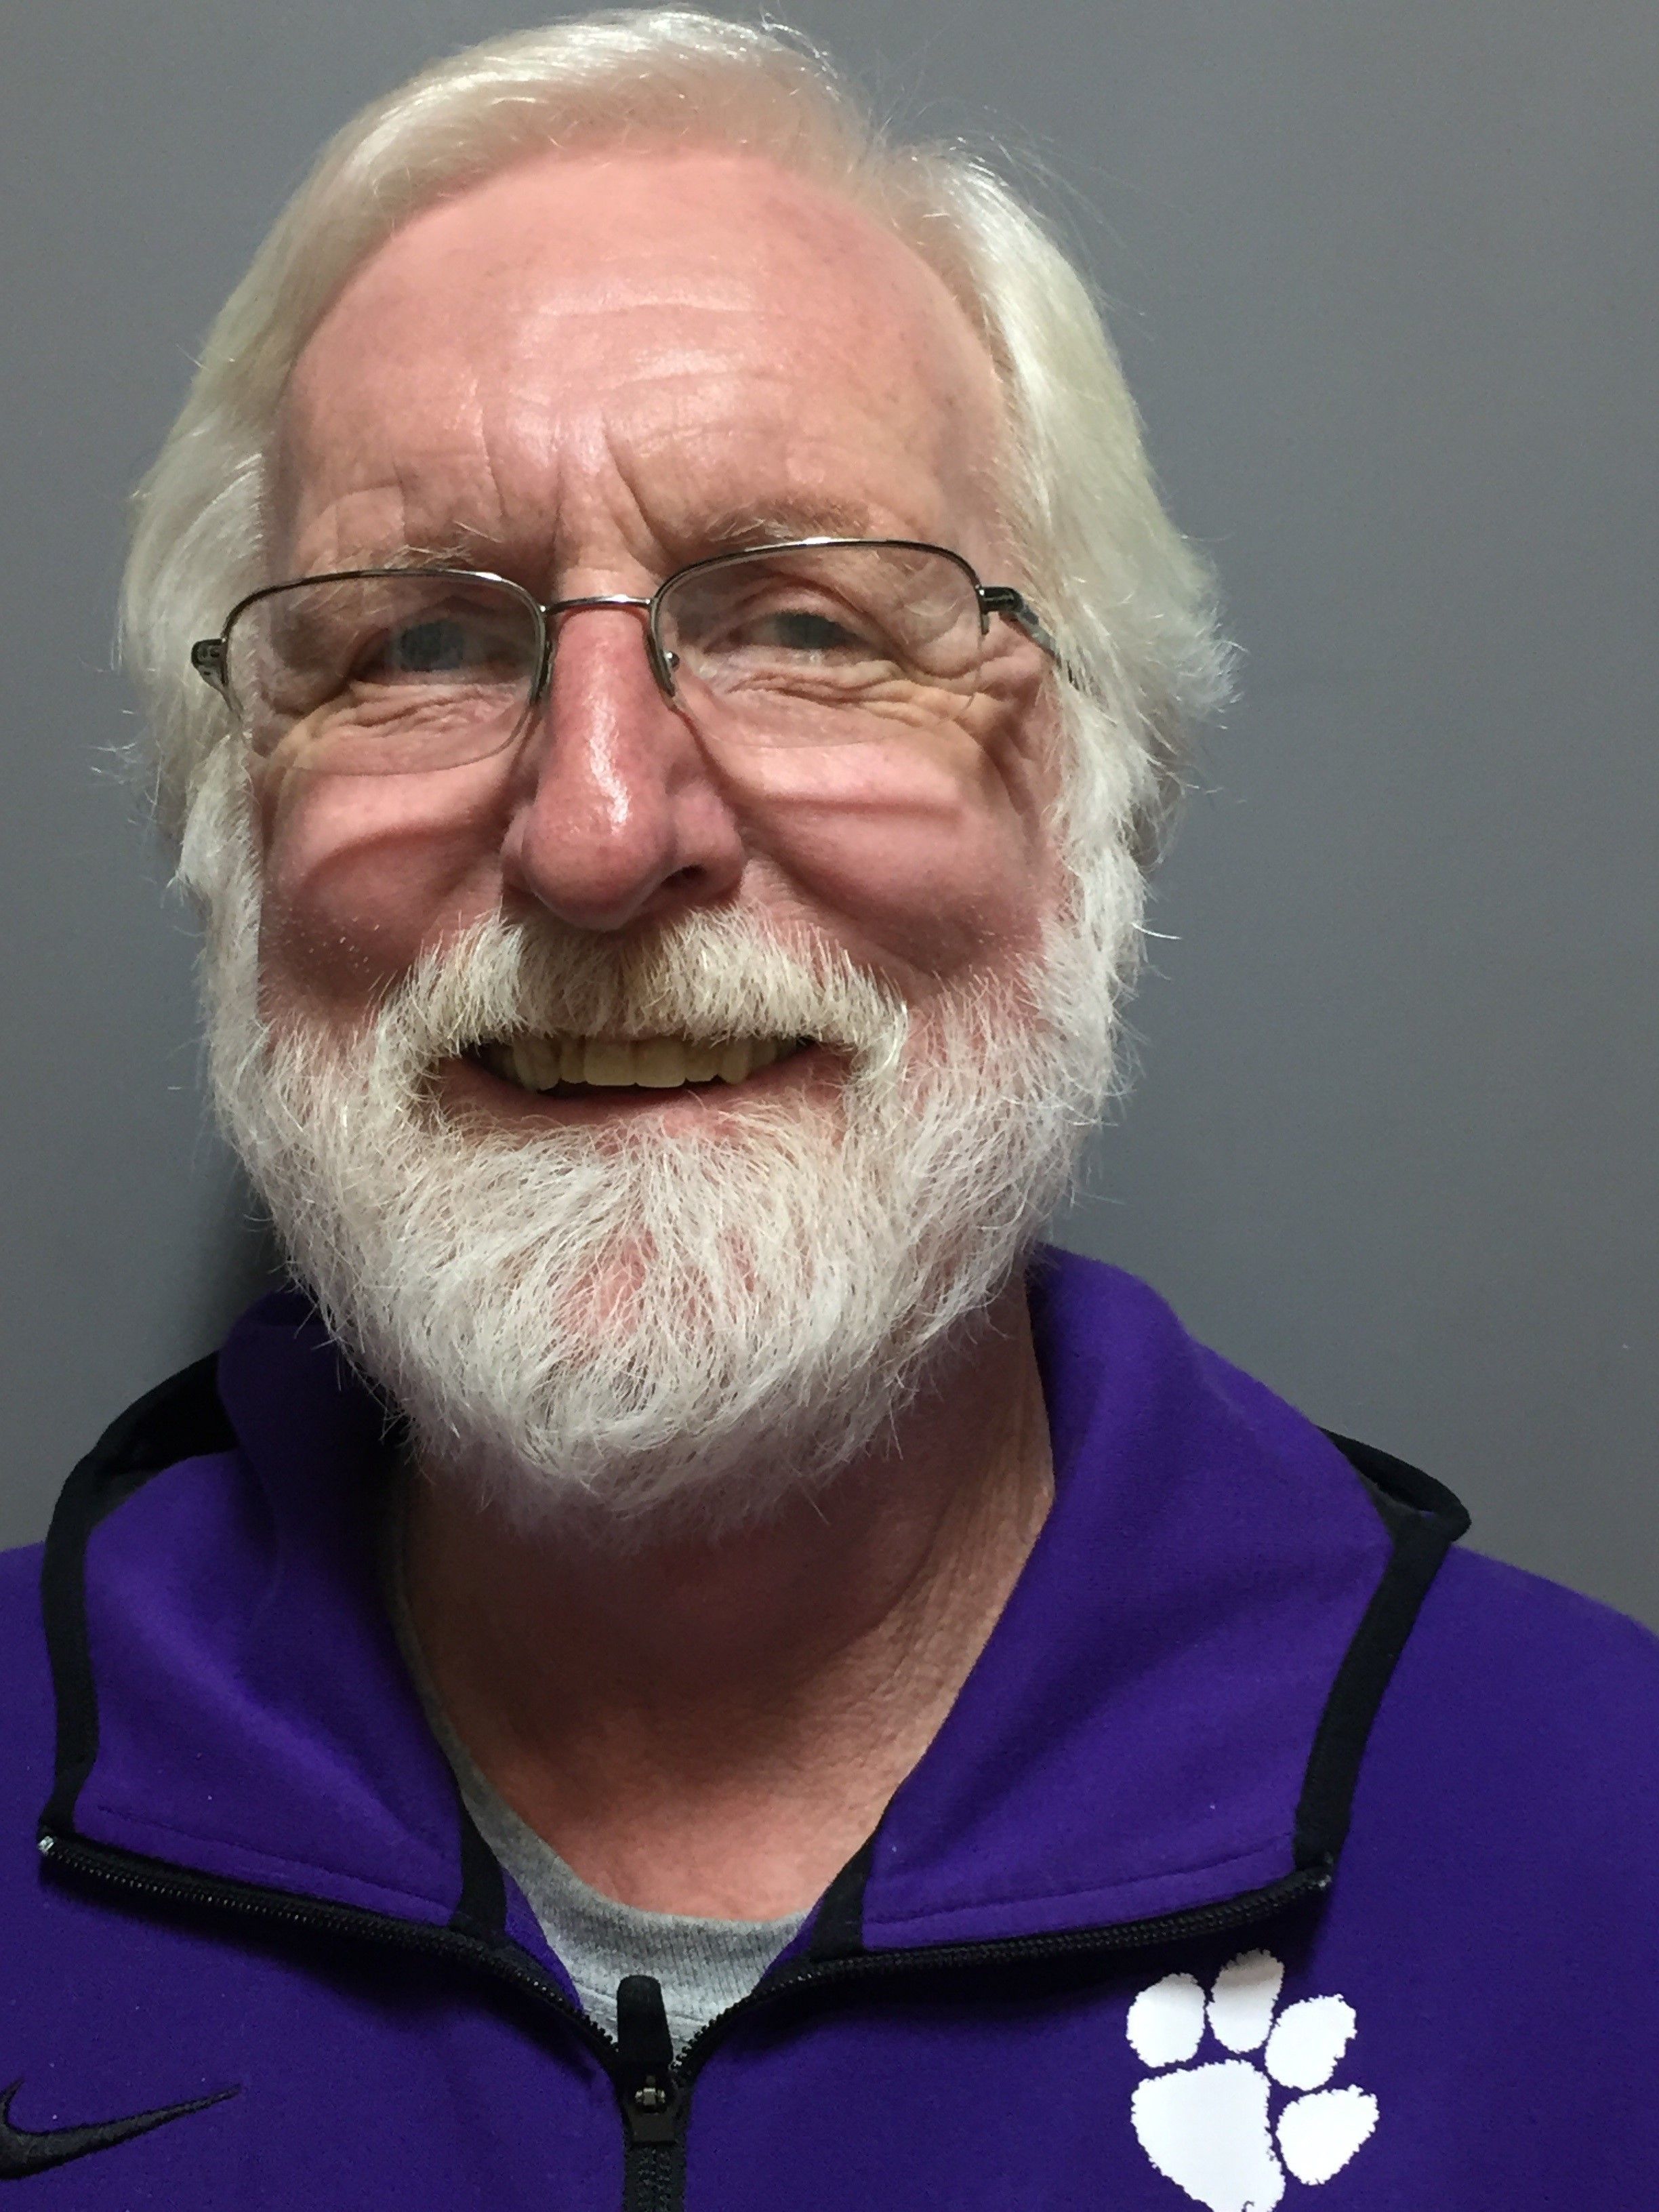 A white man with a white beard in a purple collared shirt and glasses smiles at the camera. This is Chris Jensen.